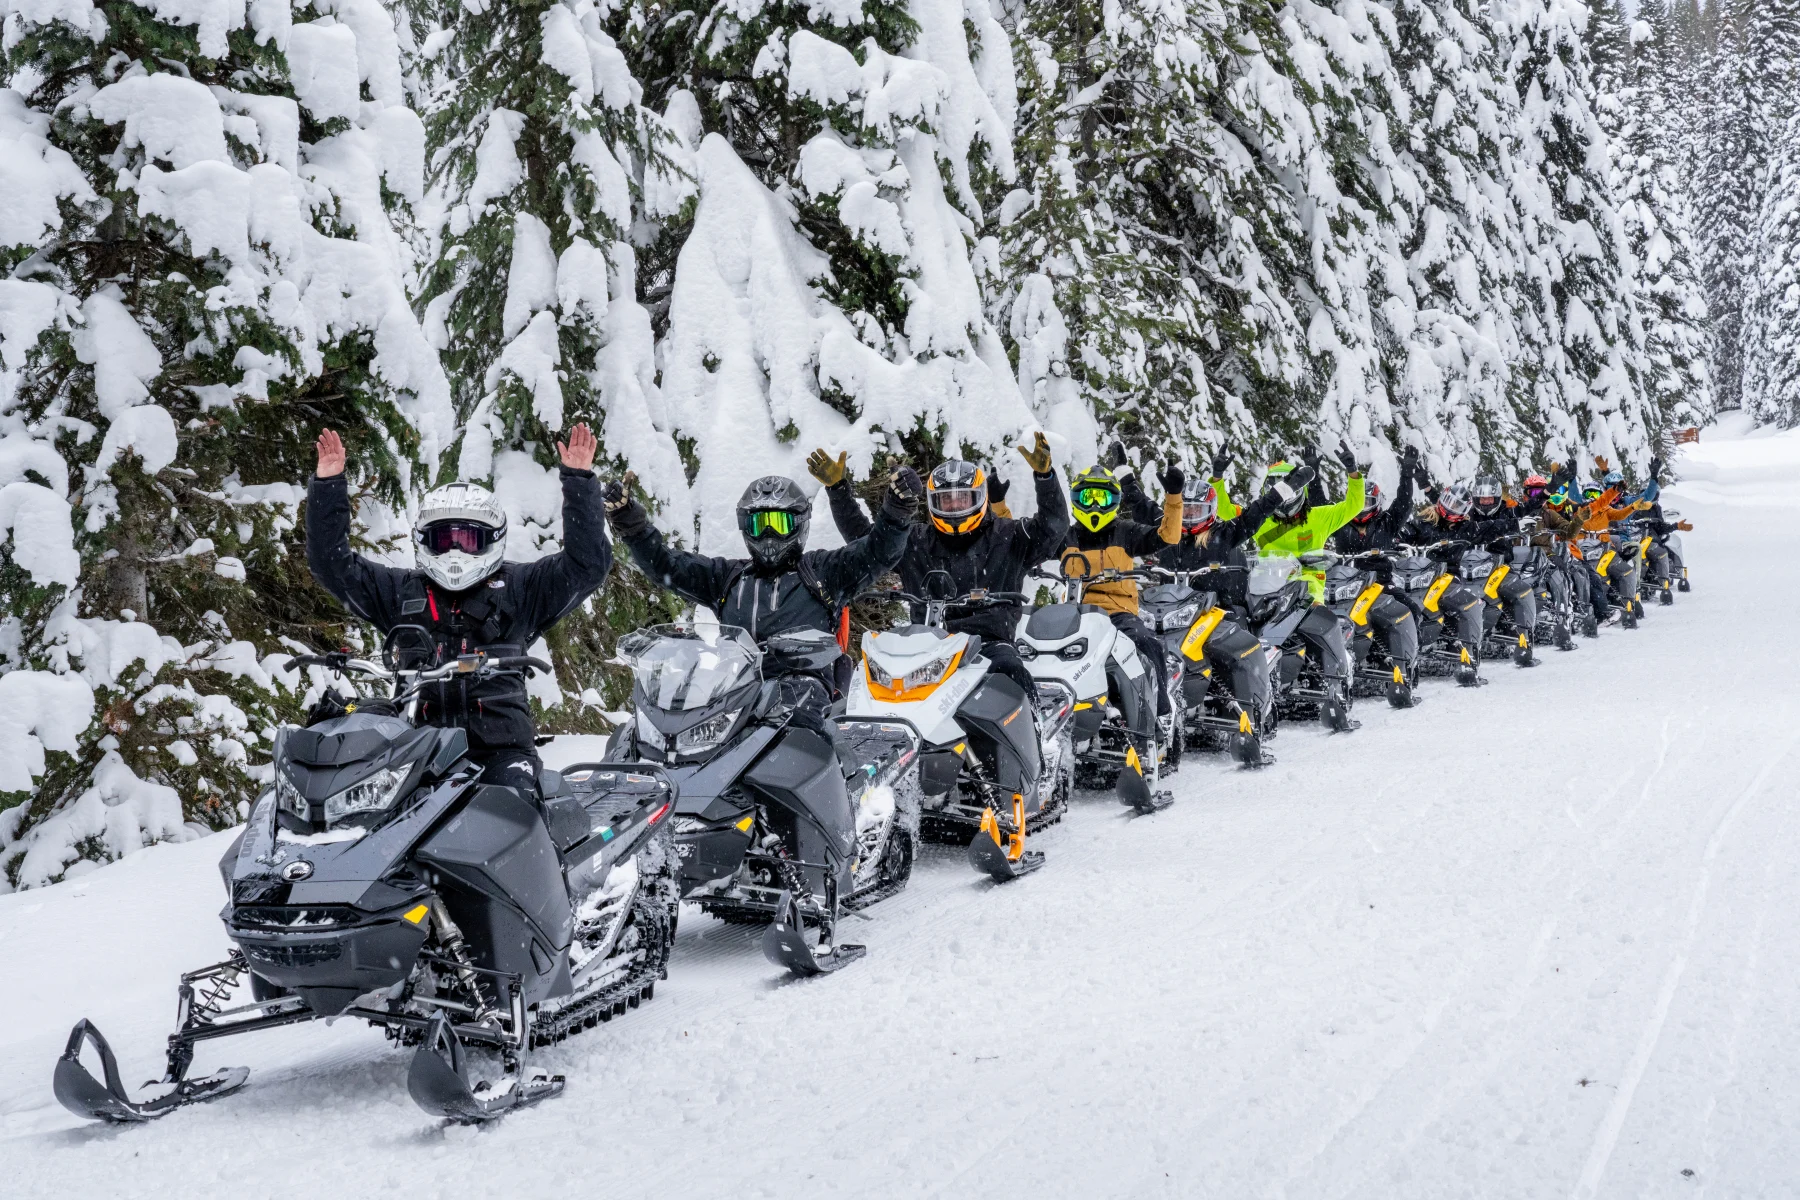 The Best Value Snowmobiles According to Kelley Blue Book Value for Snowmobiles